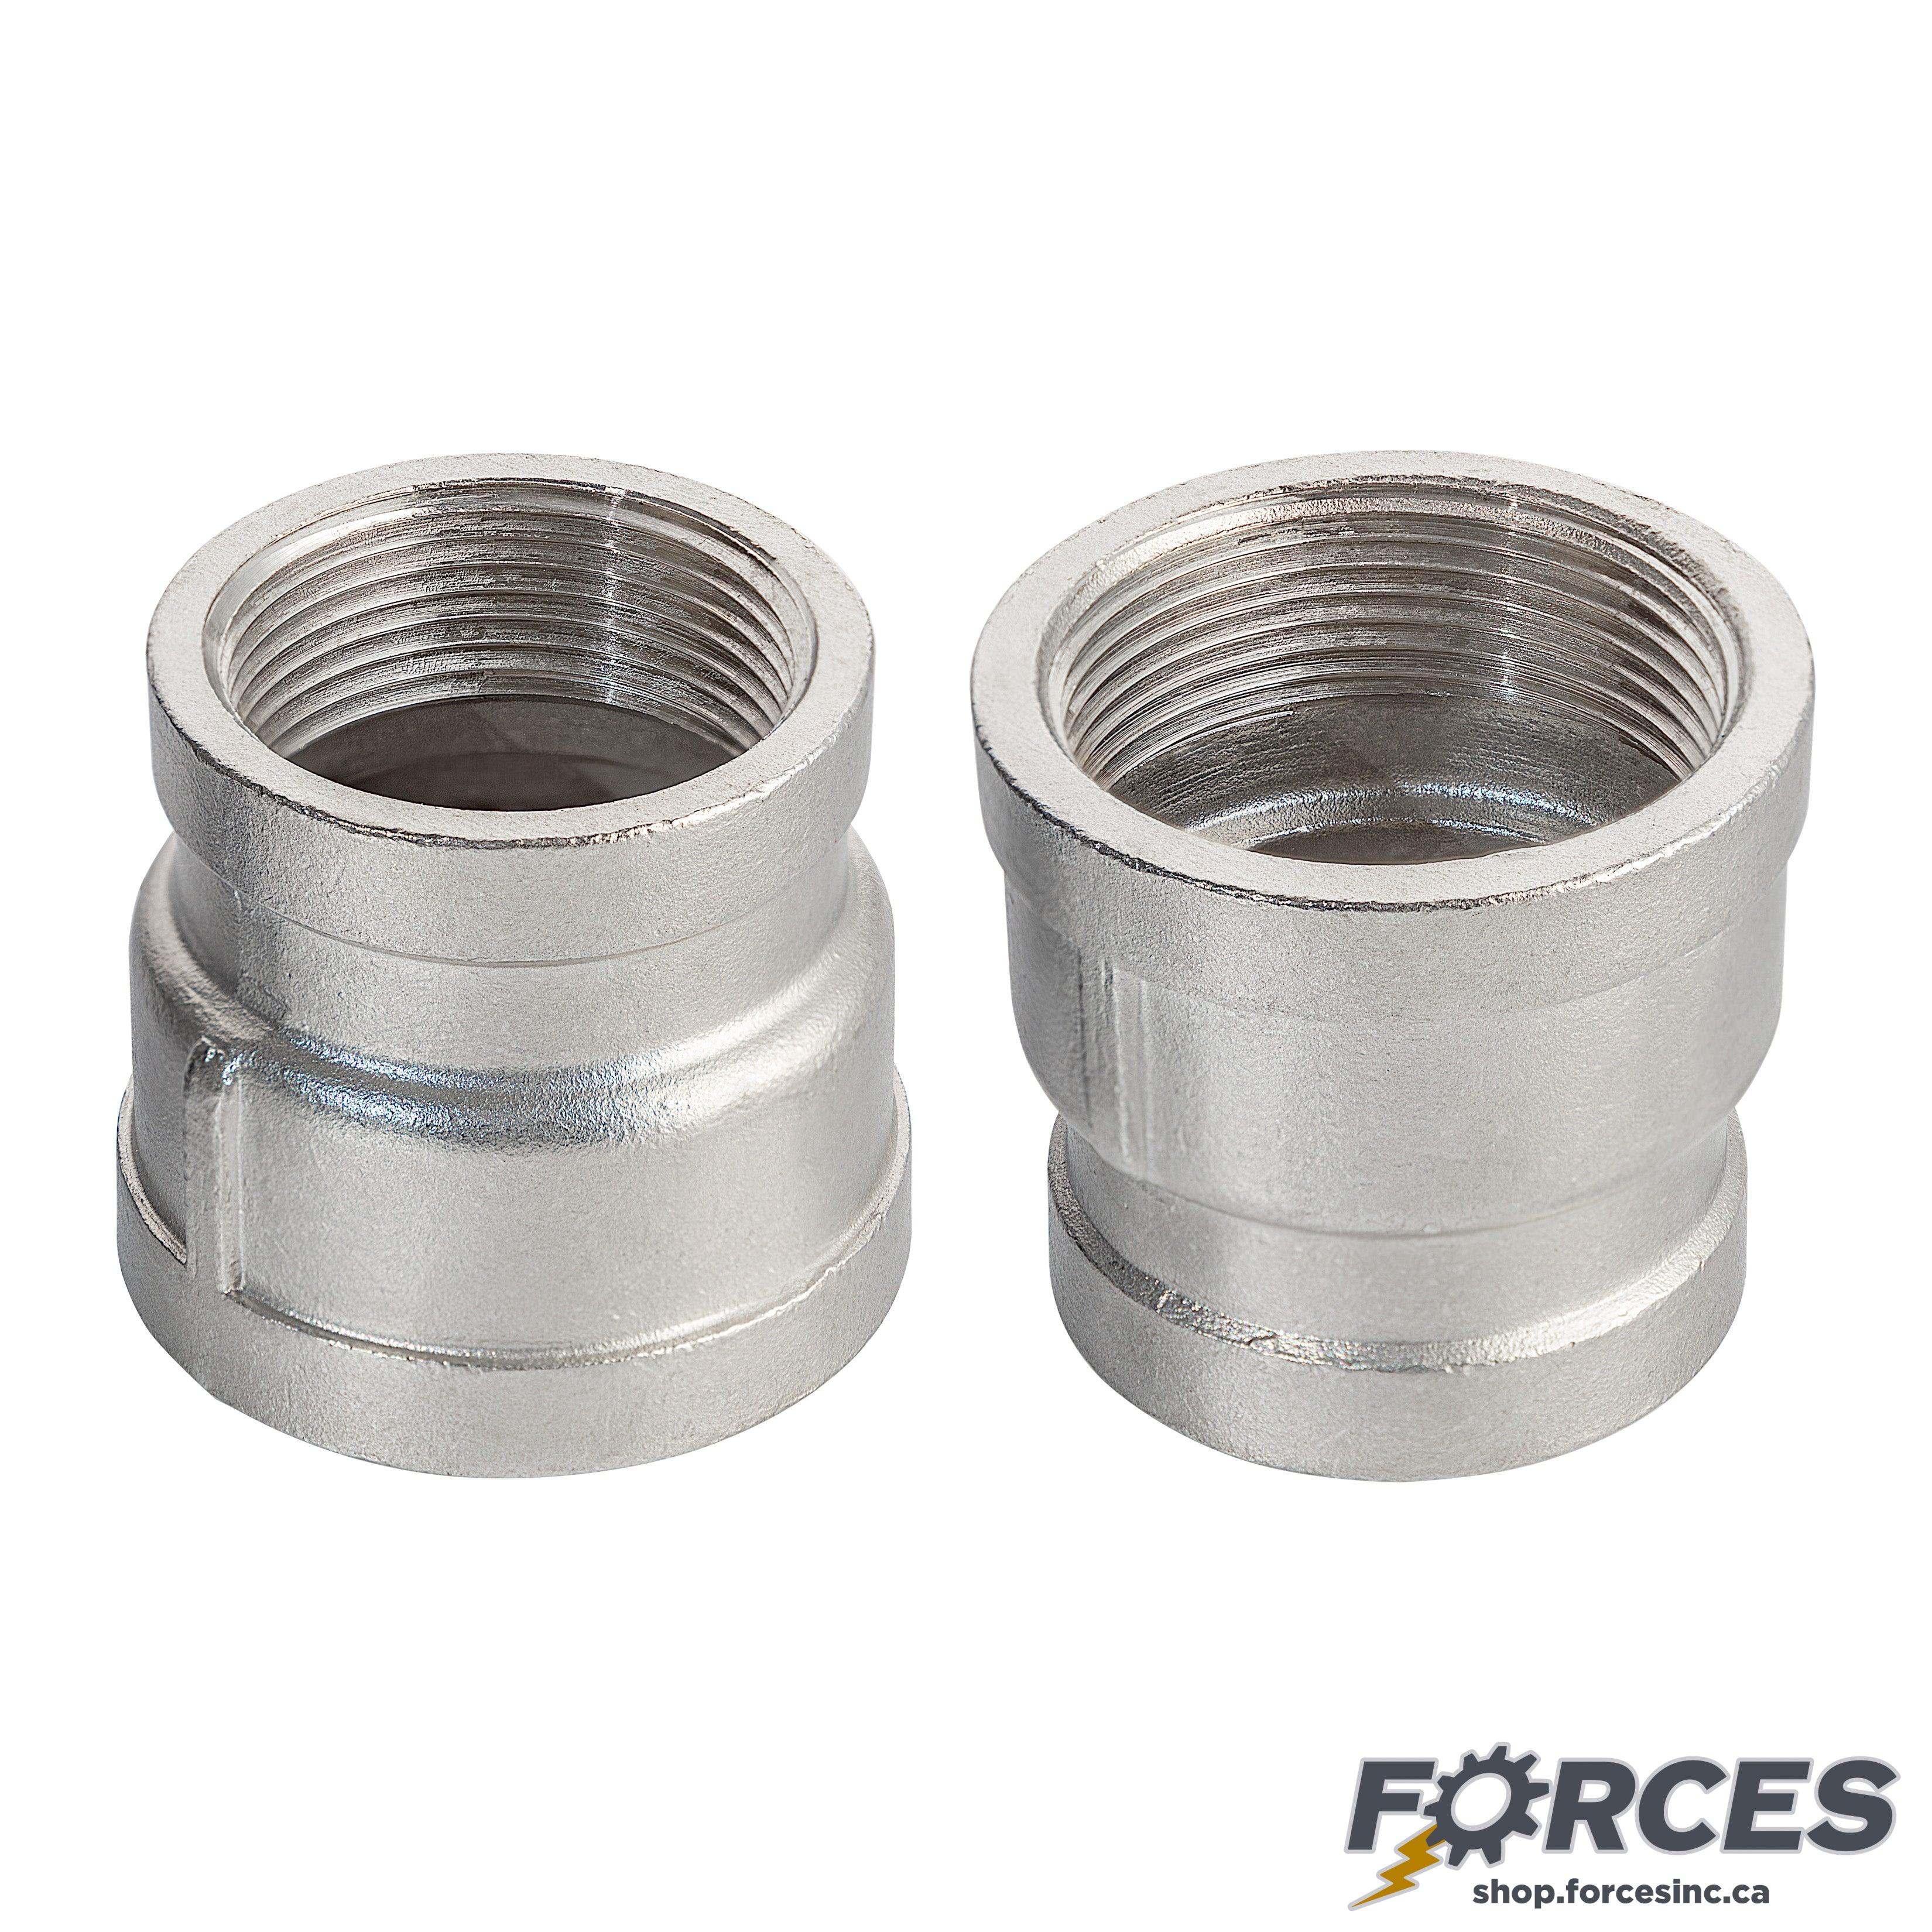 1-1/2" x 1-1/4" Coupling Reducer NPT #150 - Stainless Steel 316 - Forces Inc